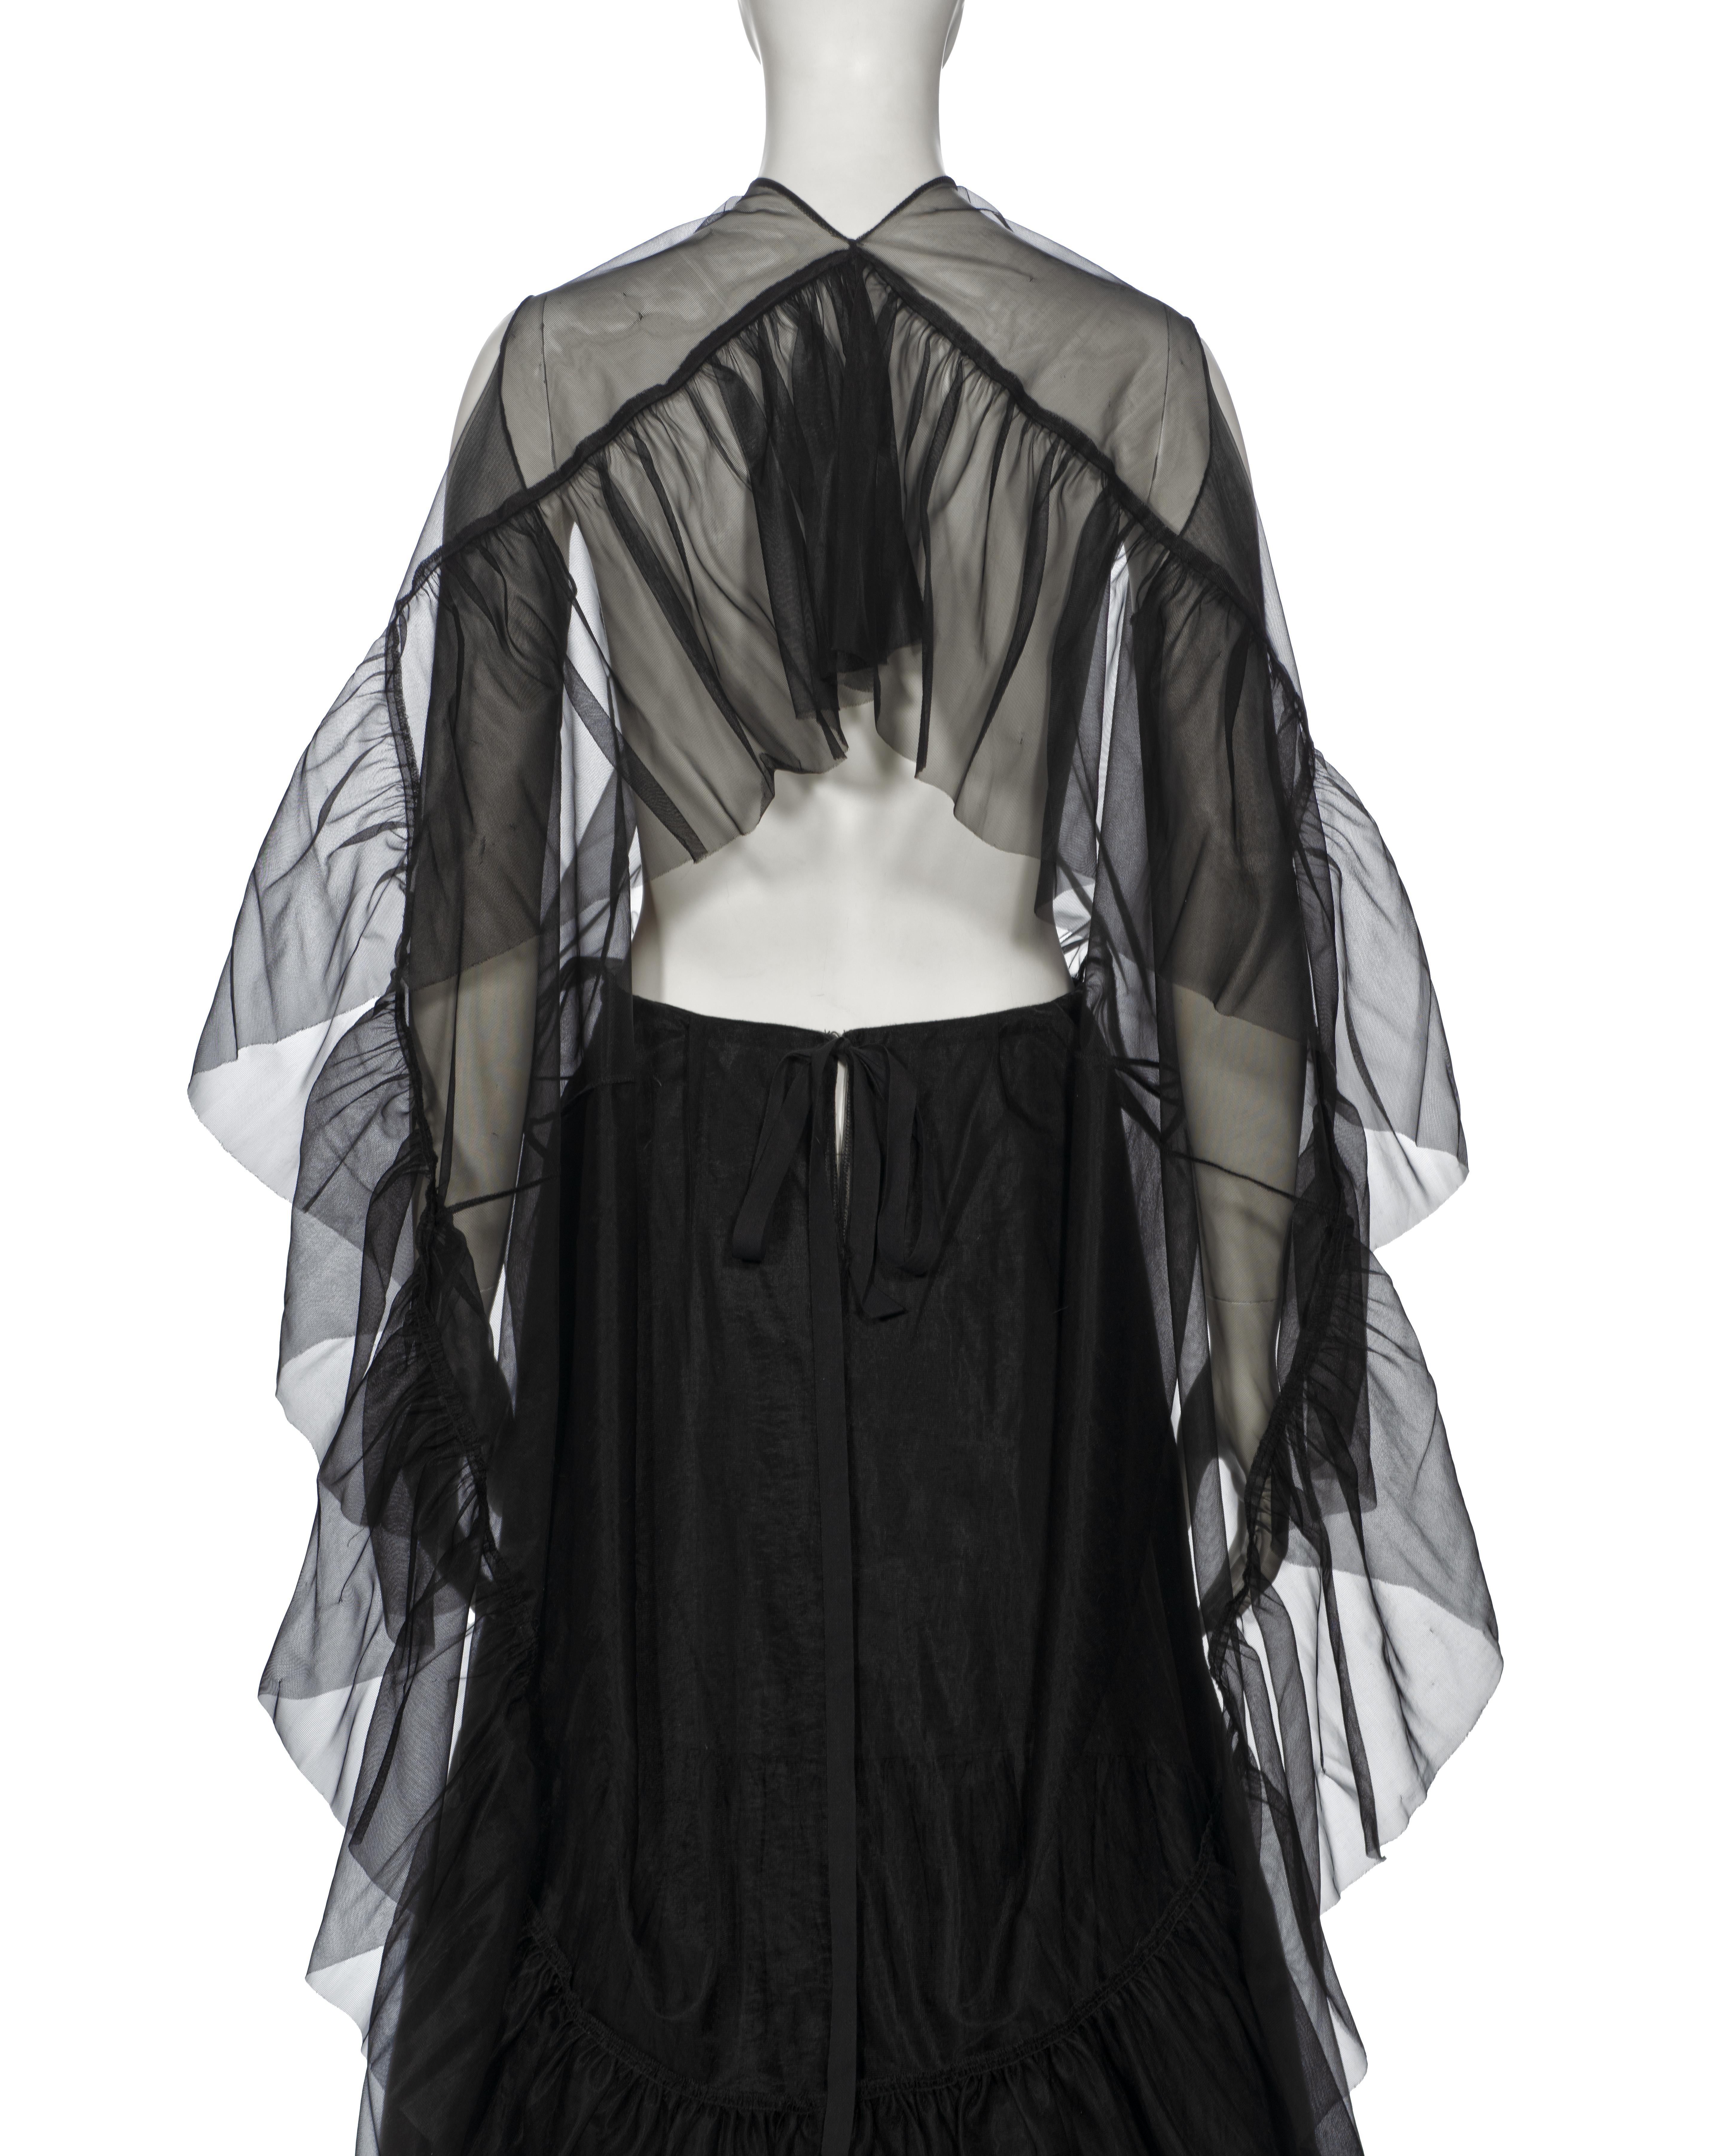 Martin Margiela Artisanal Evening Dress Made Out Of Vintage Petticoats, ss 2003 For Sale 2